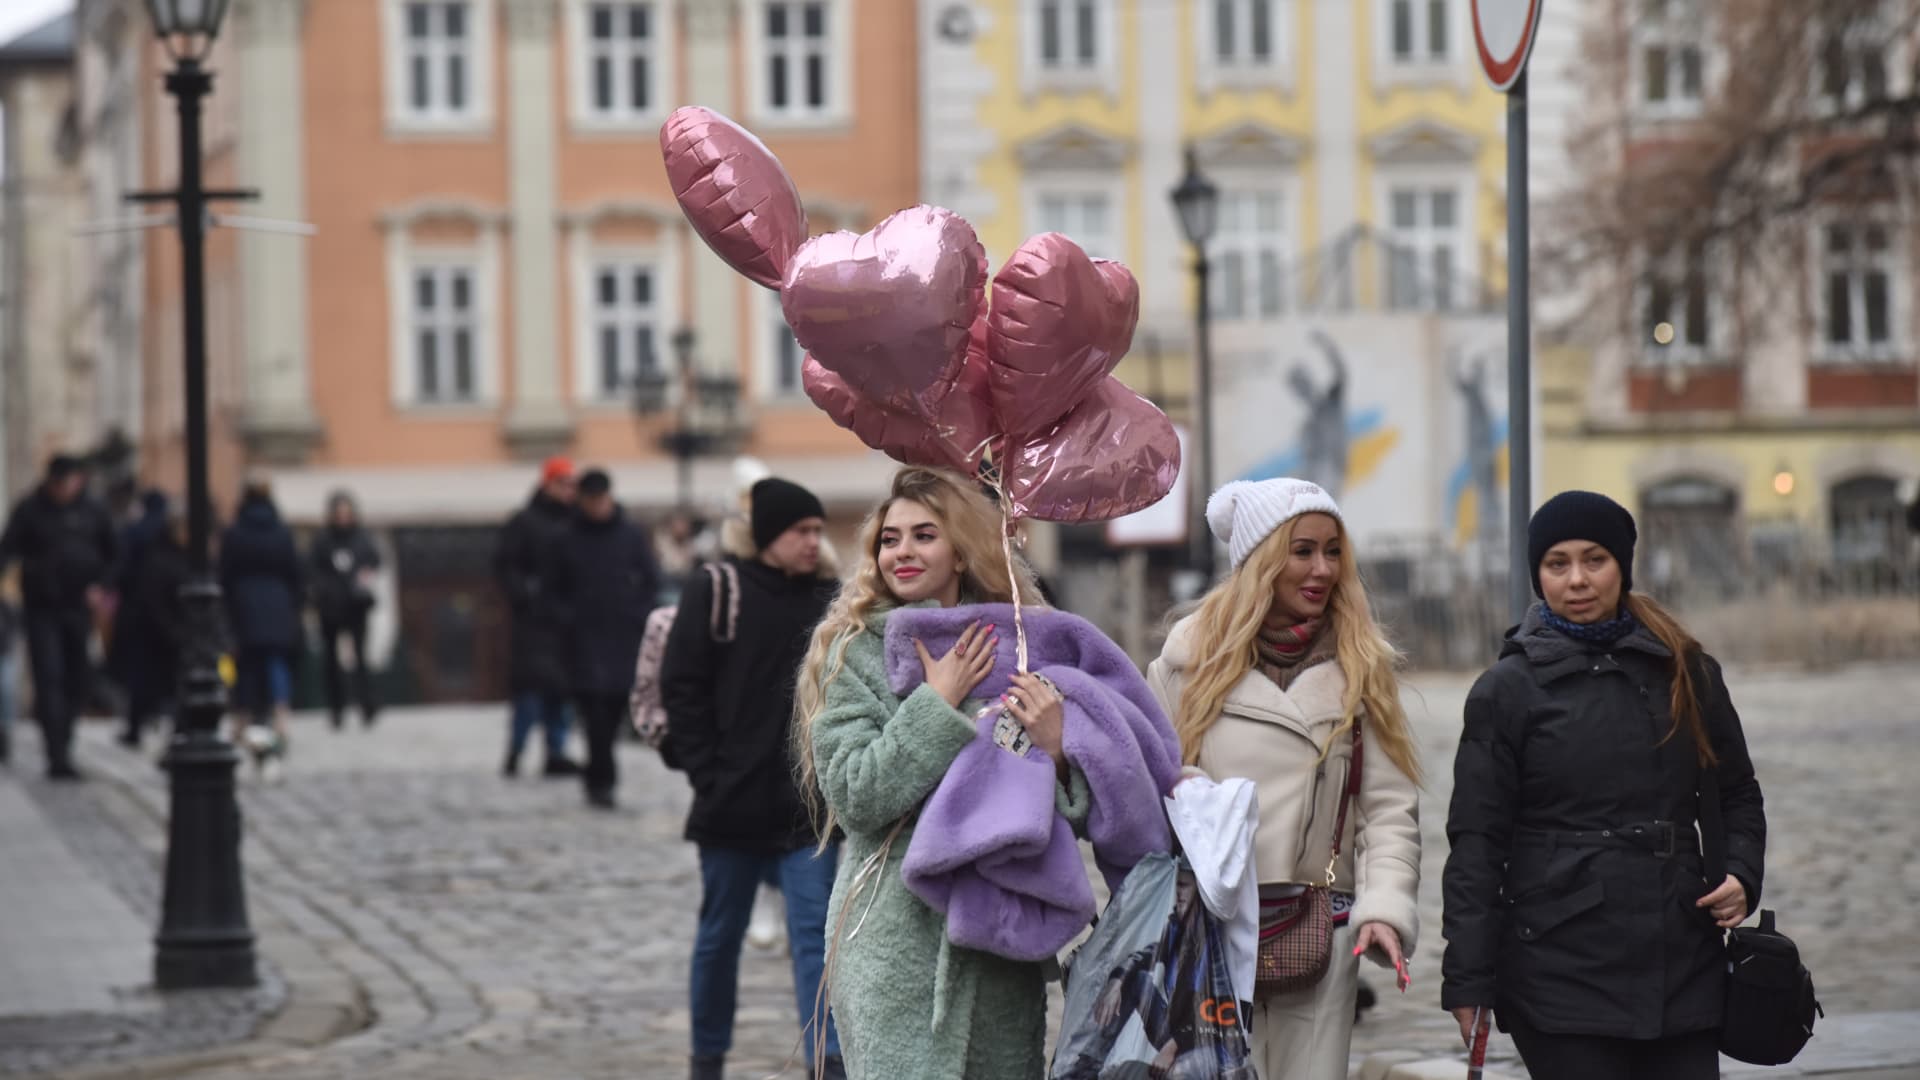 A woman walks with heart-shaped balloons on a city street on Valentine's Day during the Russian-Ukrainian war in Lviv, Ukraine on February 14, 2023. (Photo by Pavlo Palamarchuk/Anadolu Agency via Getty Images)